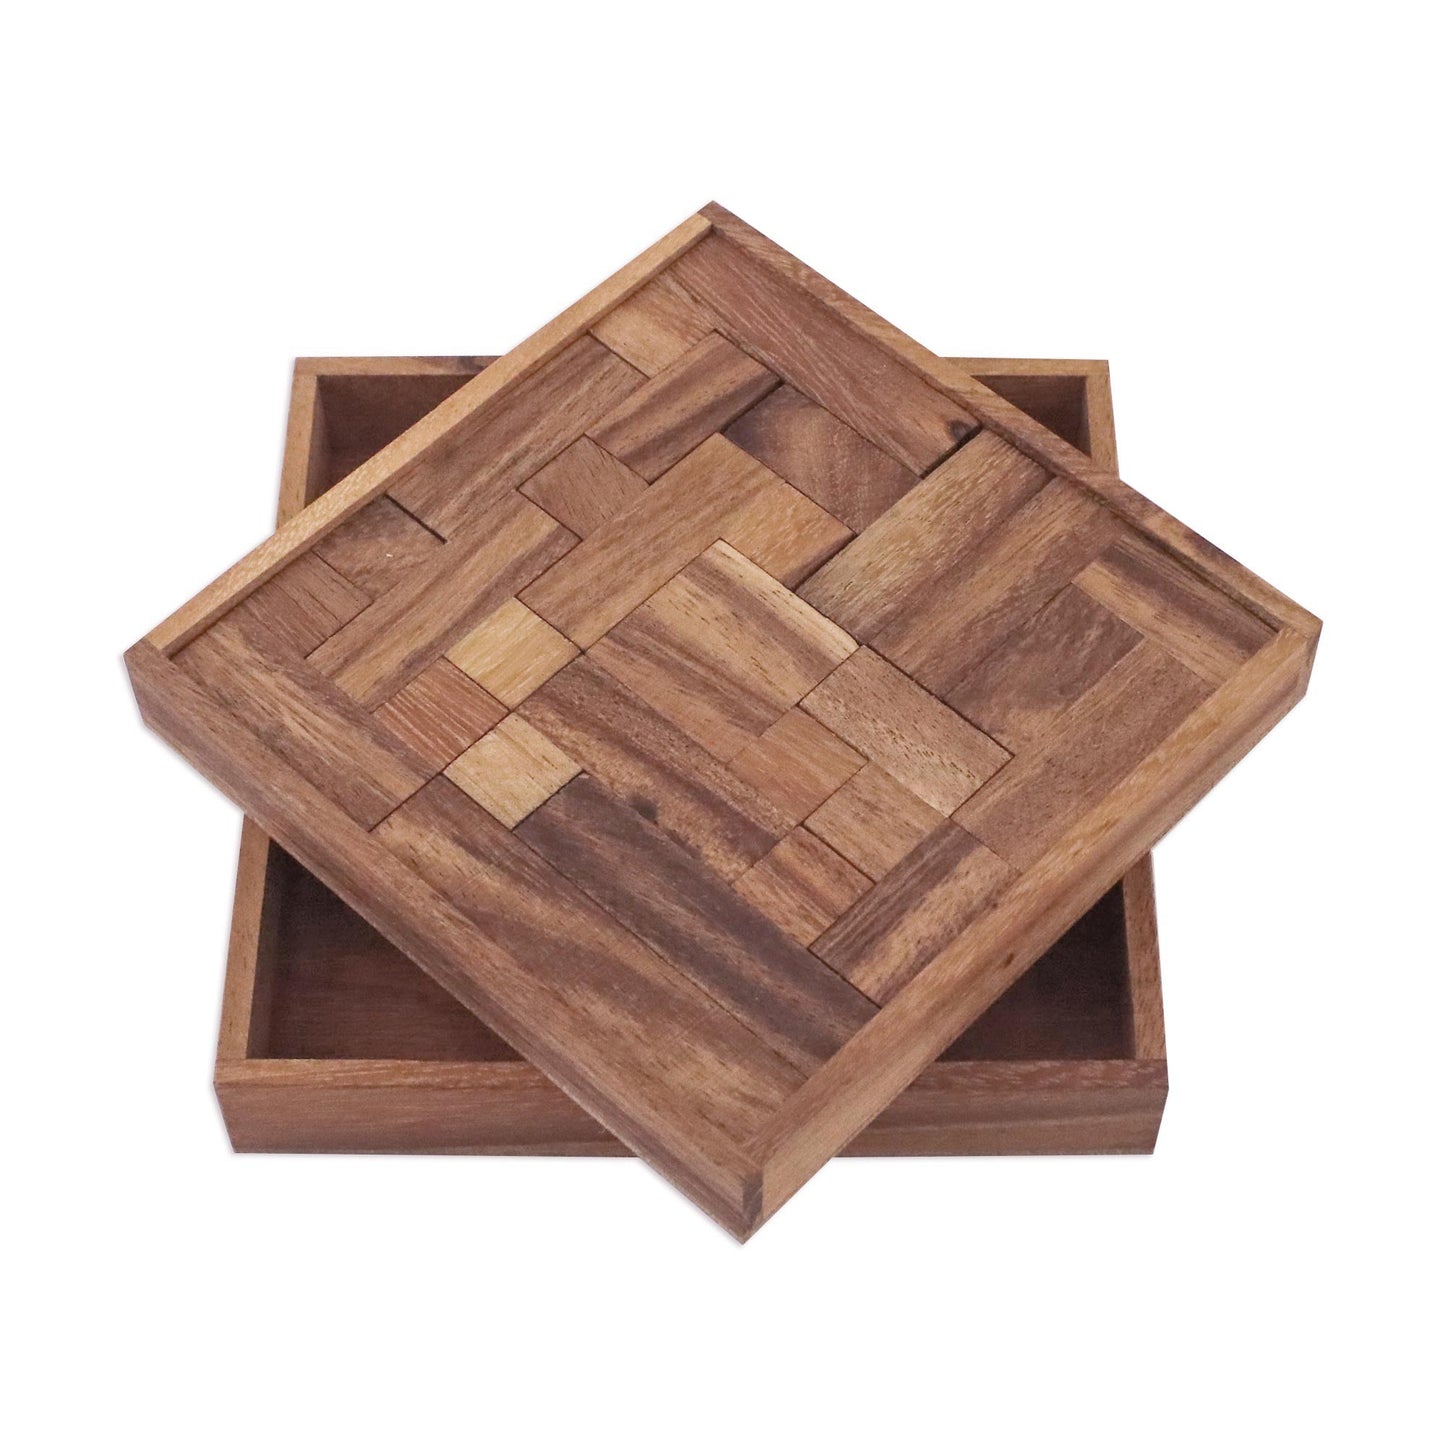 Geometry Game Handcrafted Square Wood Geometric Puzzle from Thailand